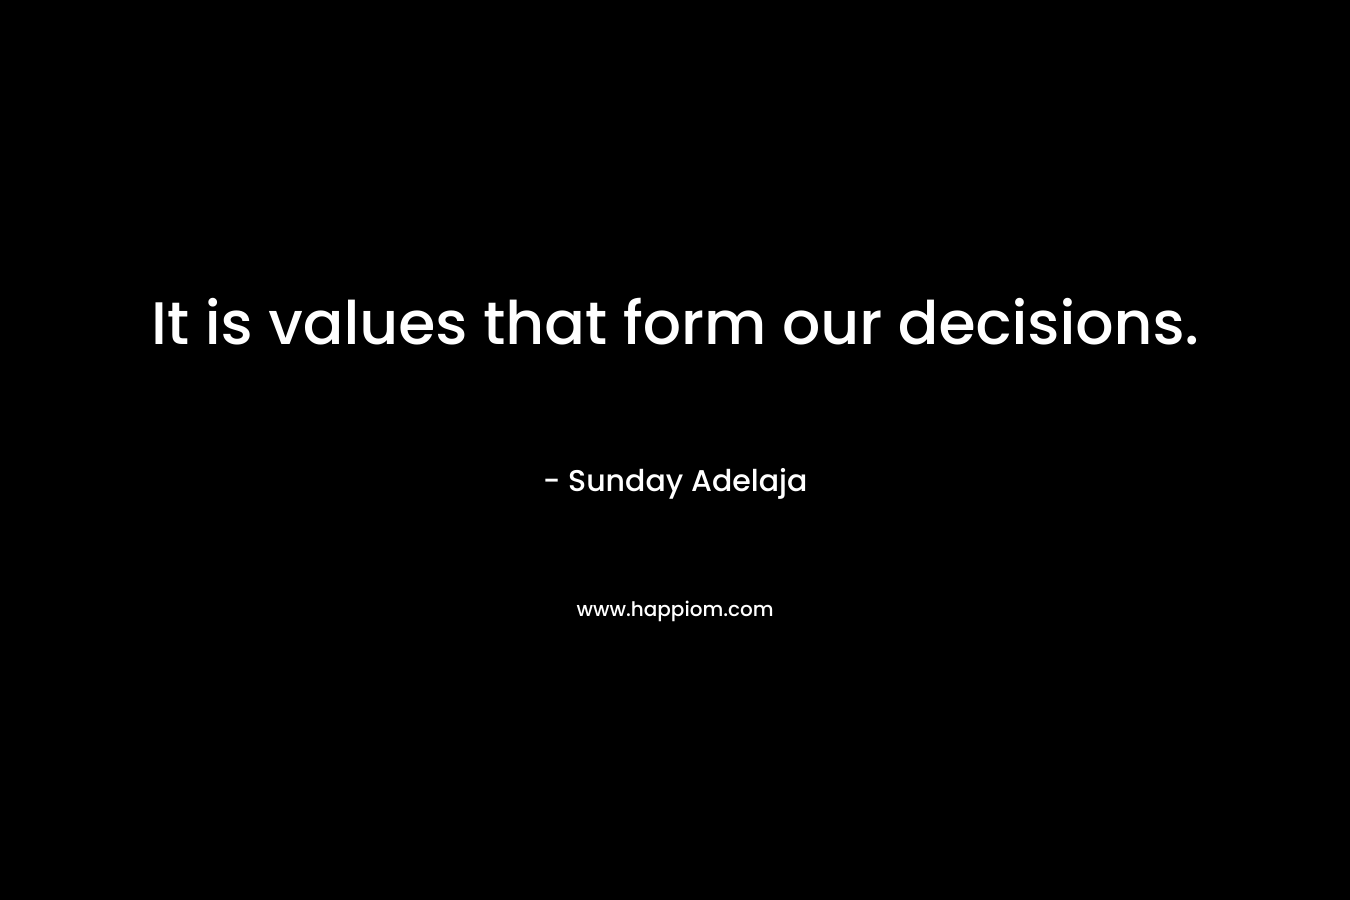 It is values that form our decisions.